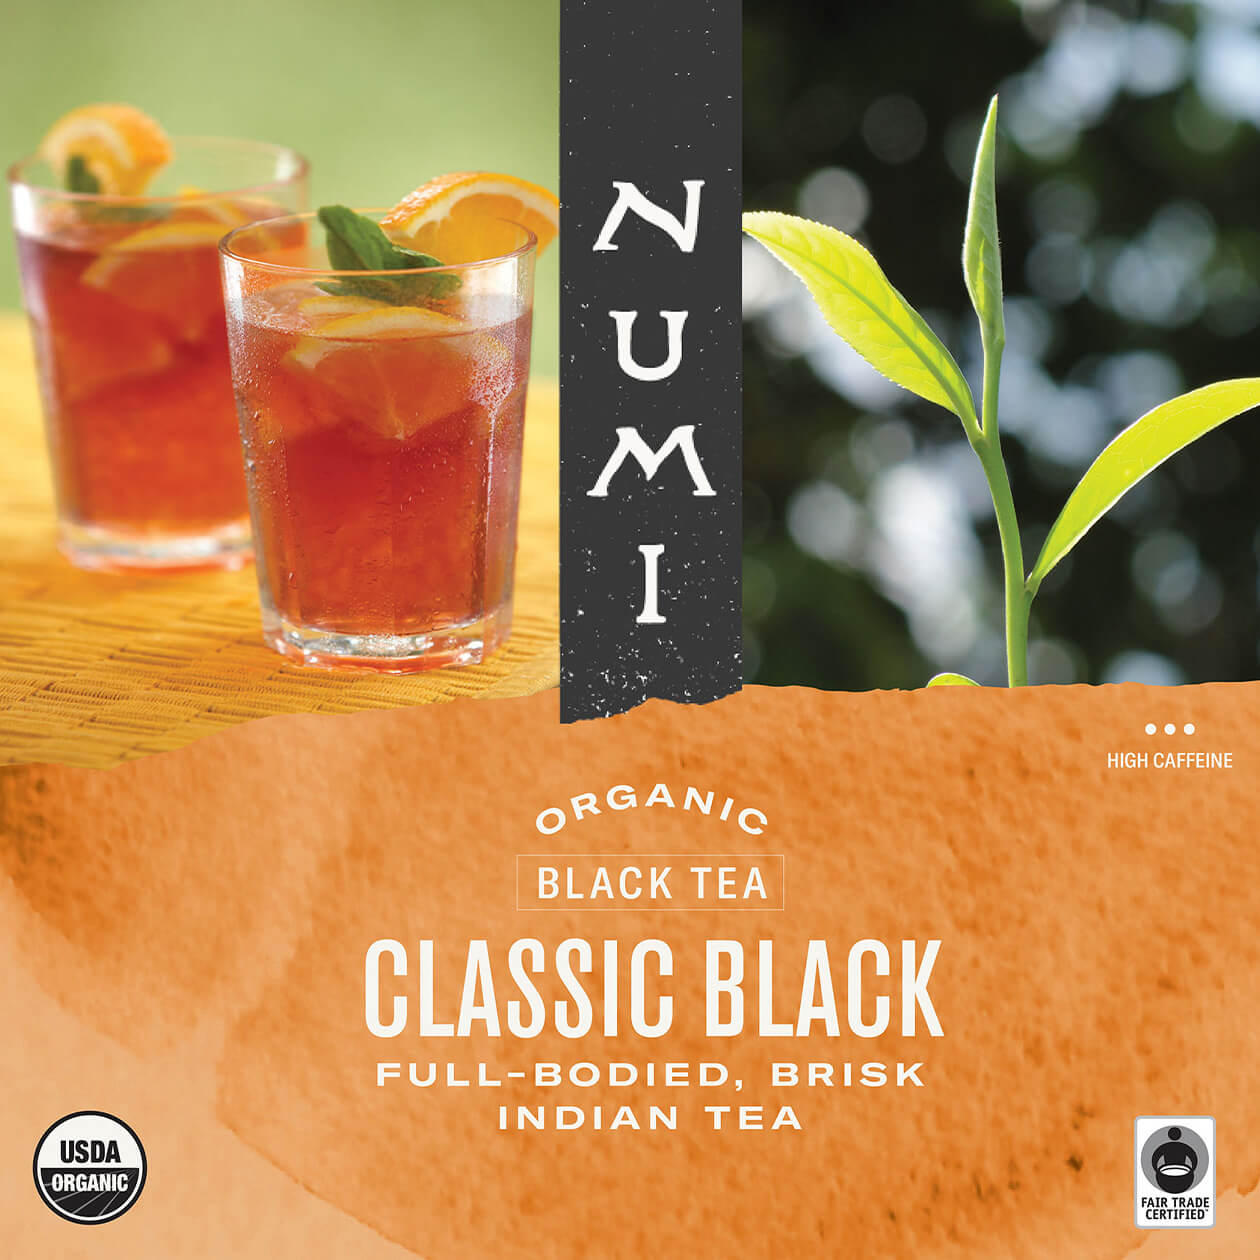 Classic Black Iced Tea label, organic and high caffeine, with images of iced tea and pure tea leaves